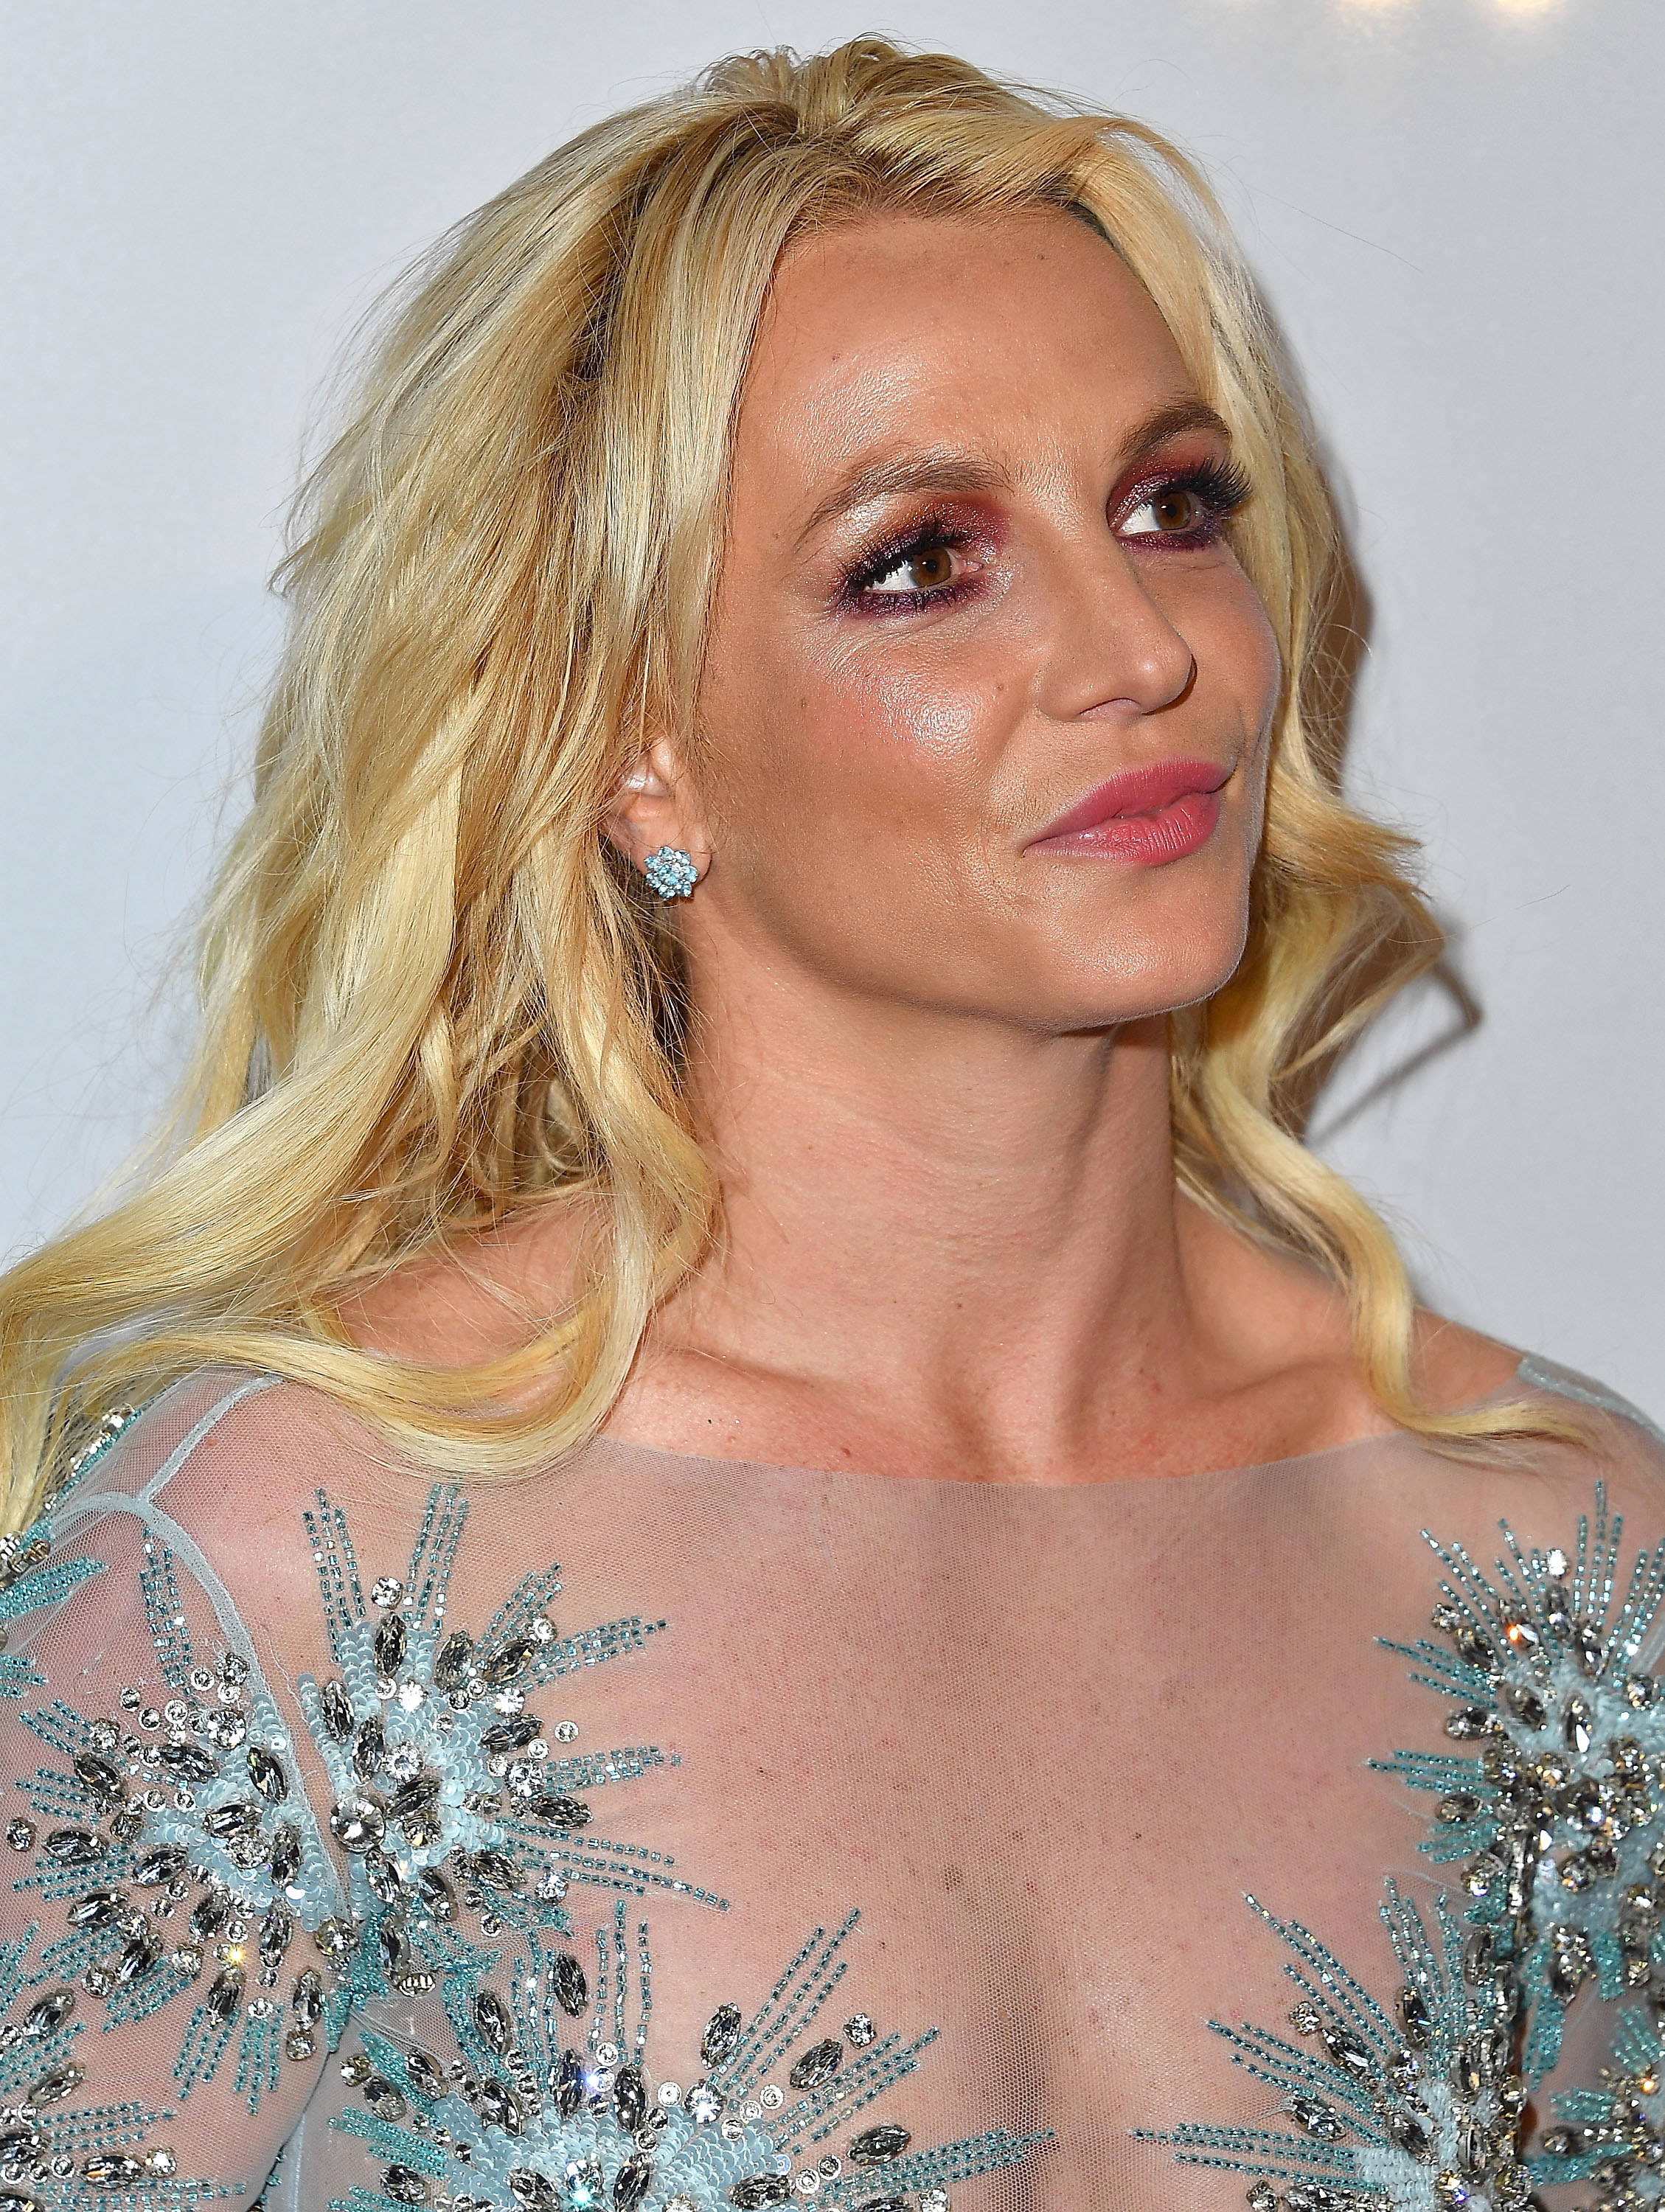 Close-up of Britney at a media event, wearing a sparkly outfit